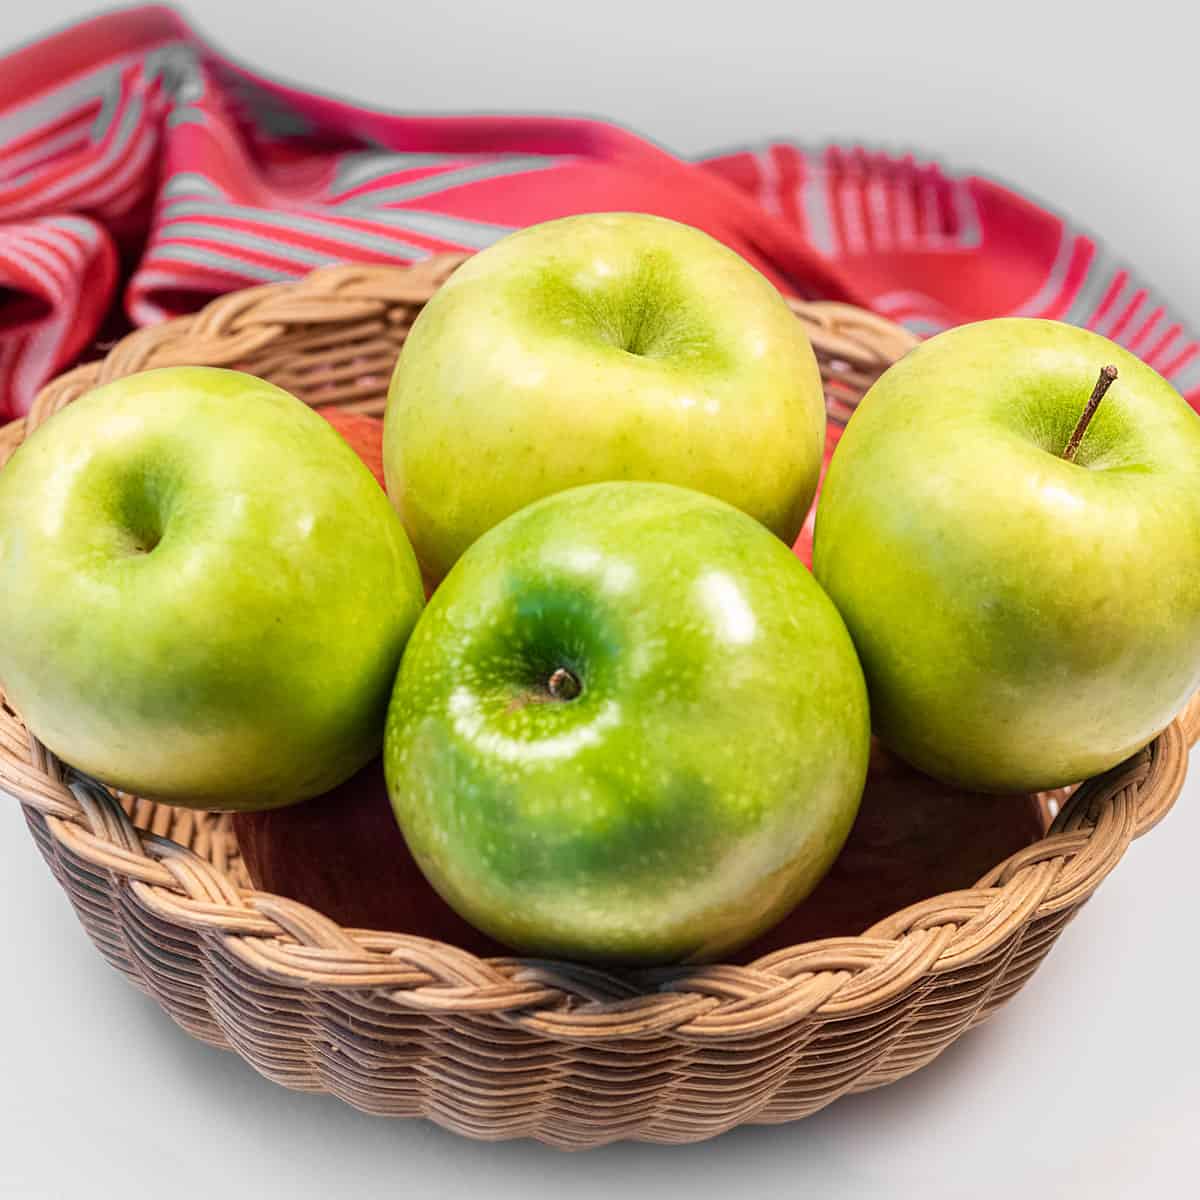 Basket of green apples with a red cloth in the background.